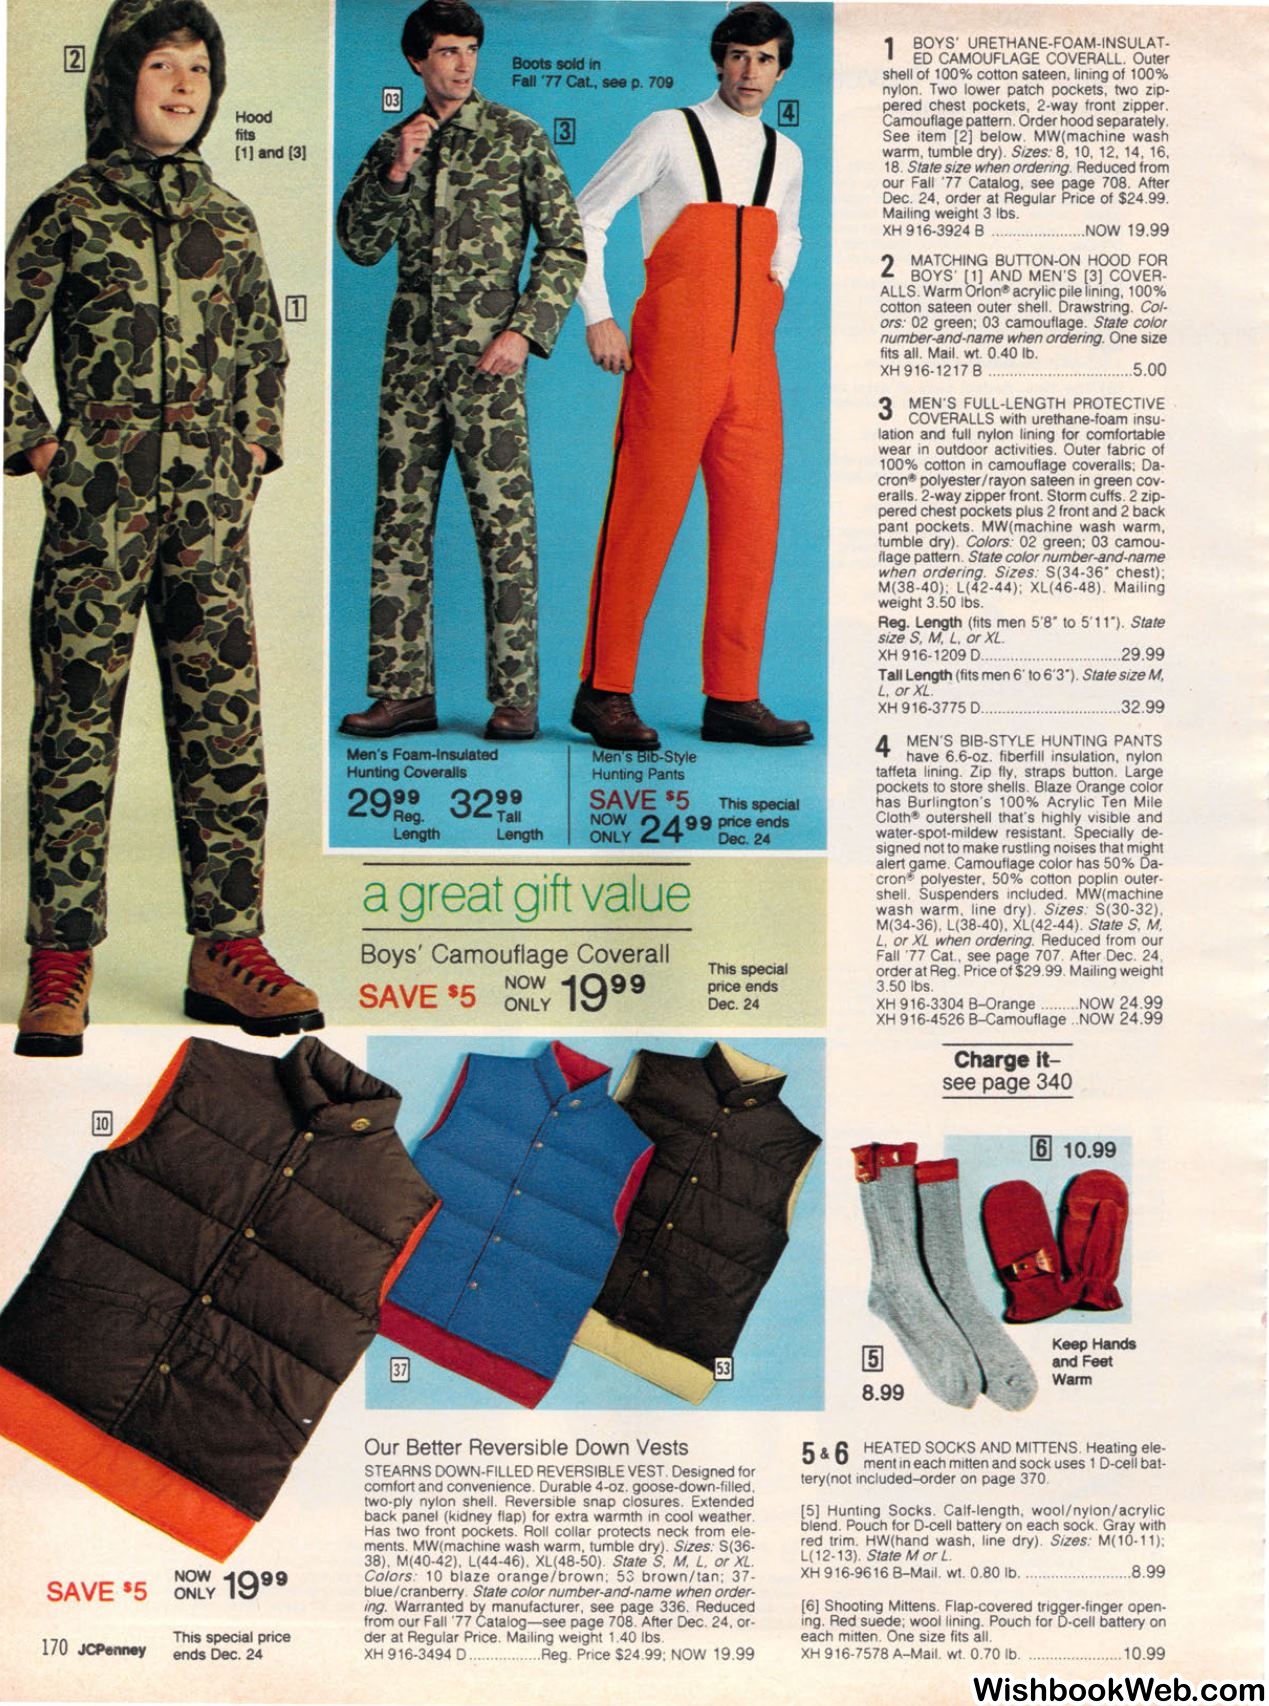 jcpenney camouflage pants